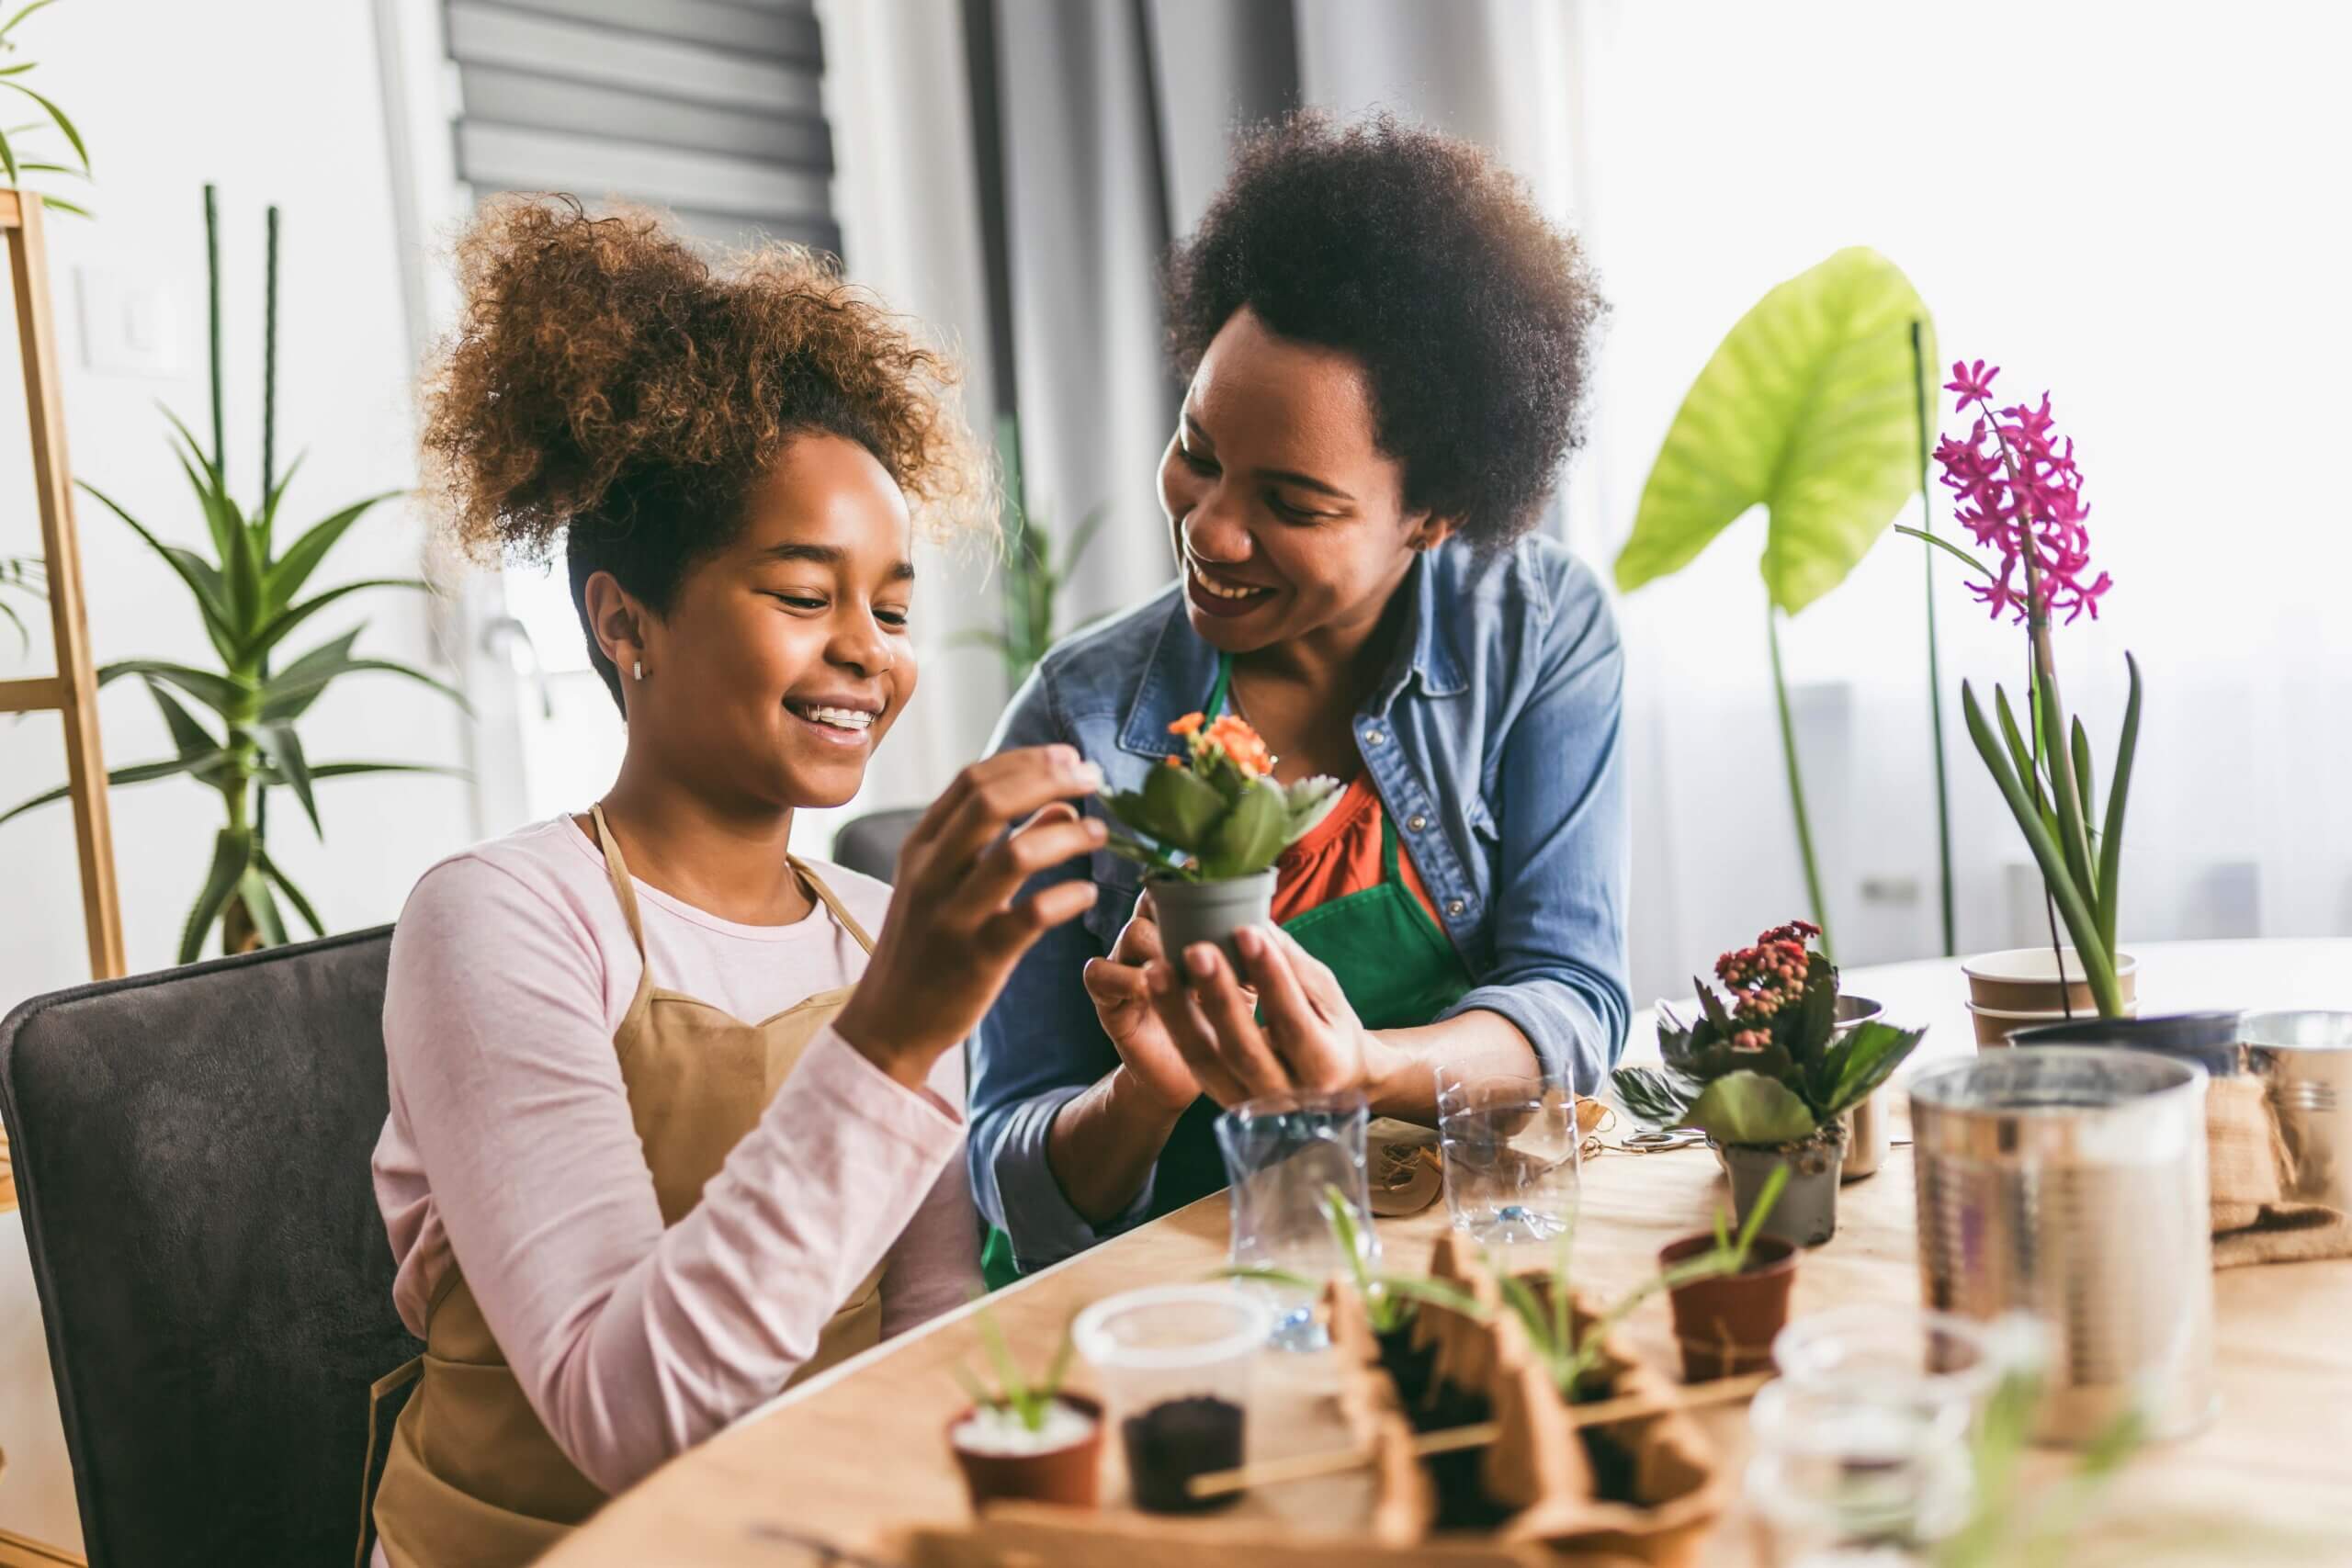 Woman with her daughter, sat at a table together as they tend to one of many mini potted plants spread out on the table's surface. The young girl is inspecting the small succulent in her hands while the mom teaches her about taking care of it. 